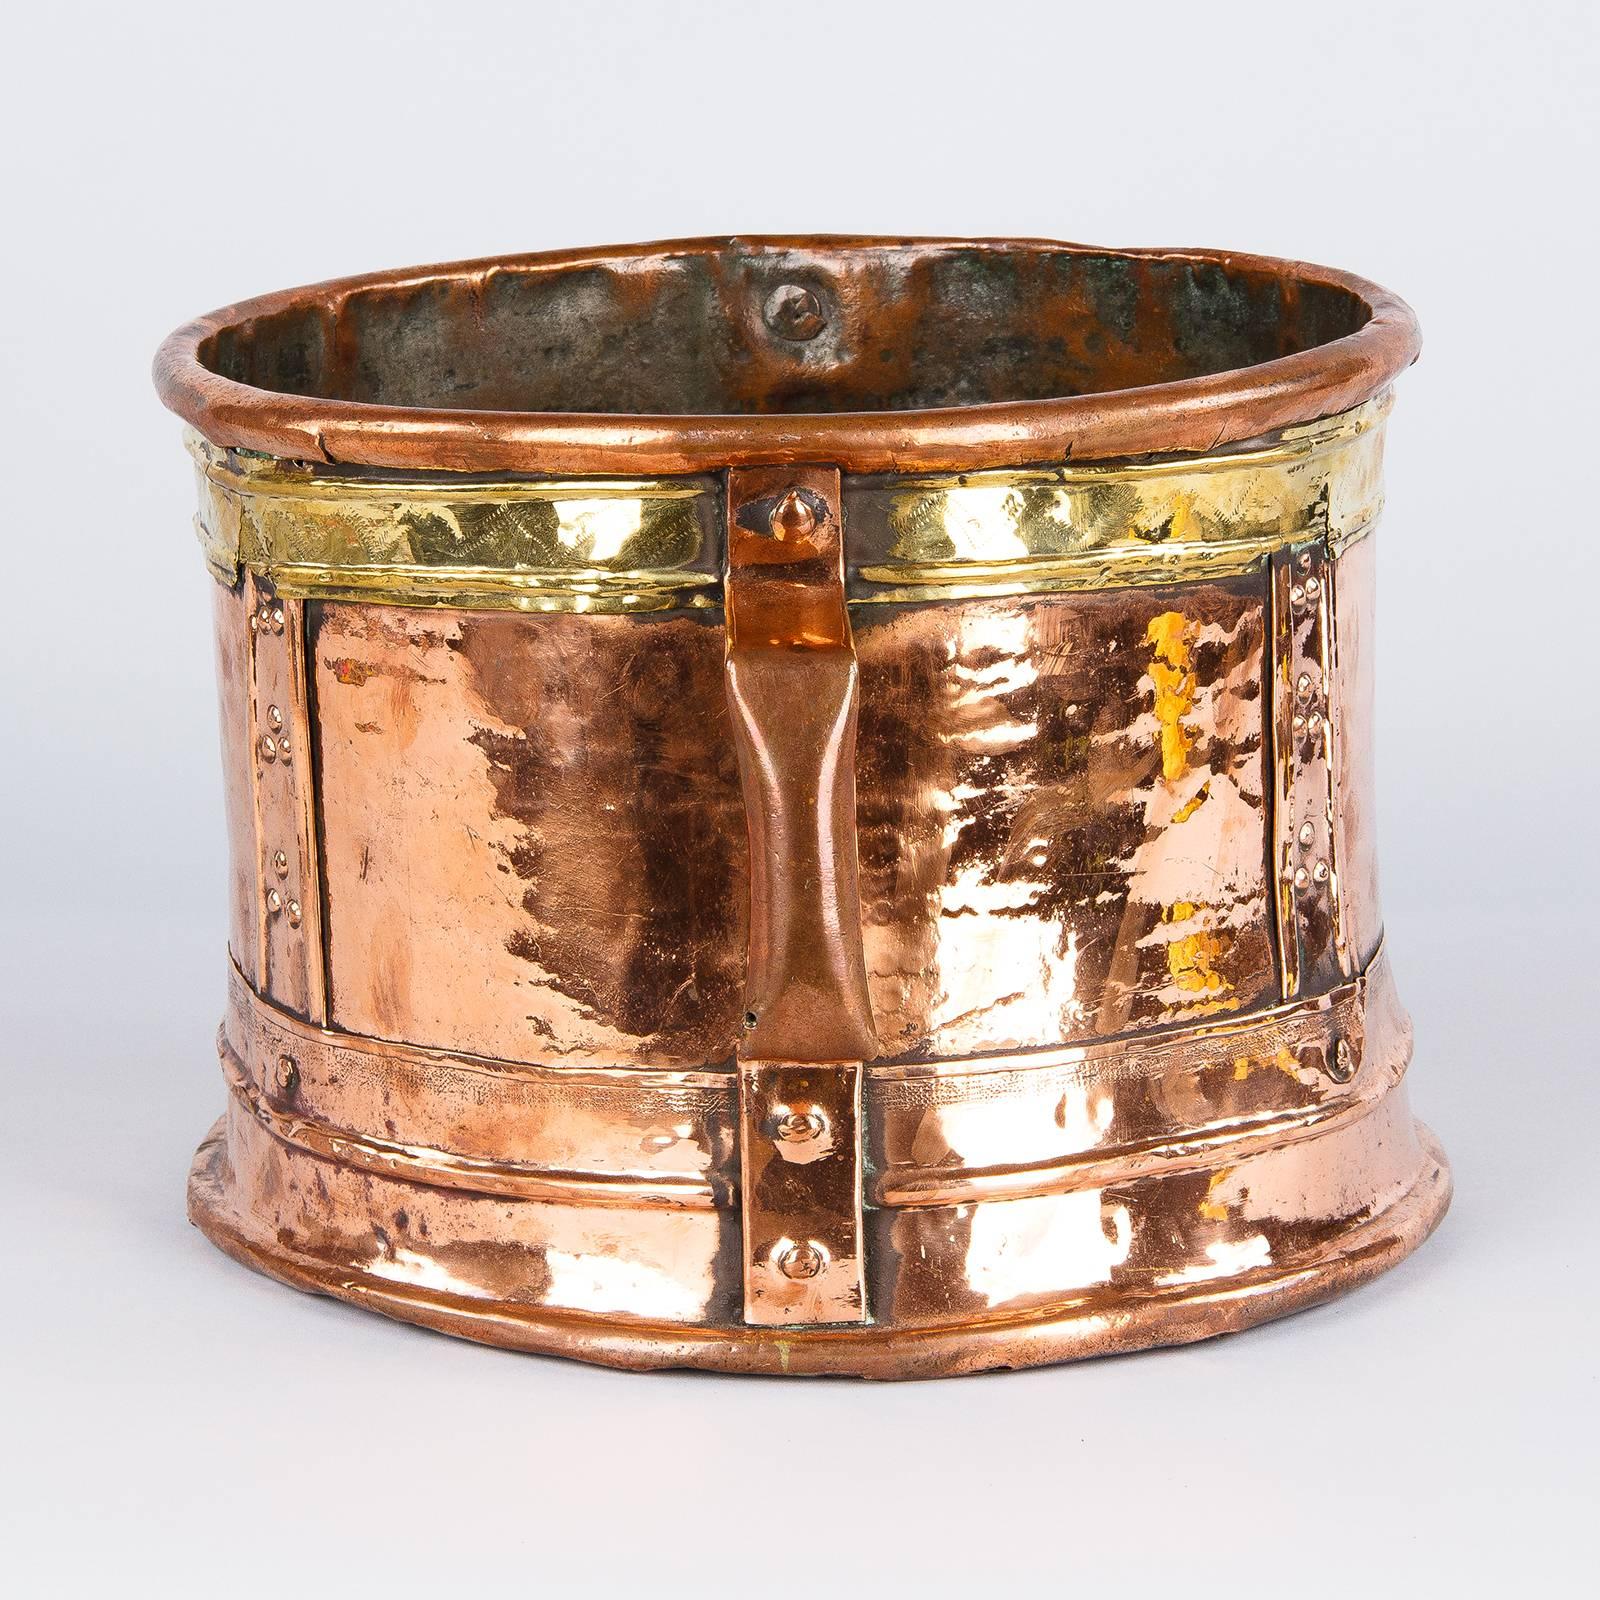 The Ferrat is a copper vessel that was use to measure grain or water. It originates from the Auvergne region of France. This copper Ferrat with brass accents and 2 handles can be dated back to the 18th century. A beautiful decorative piece that can